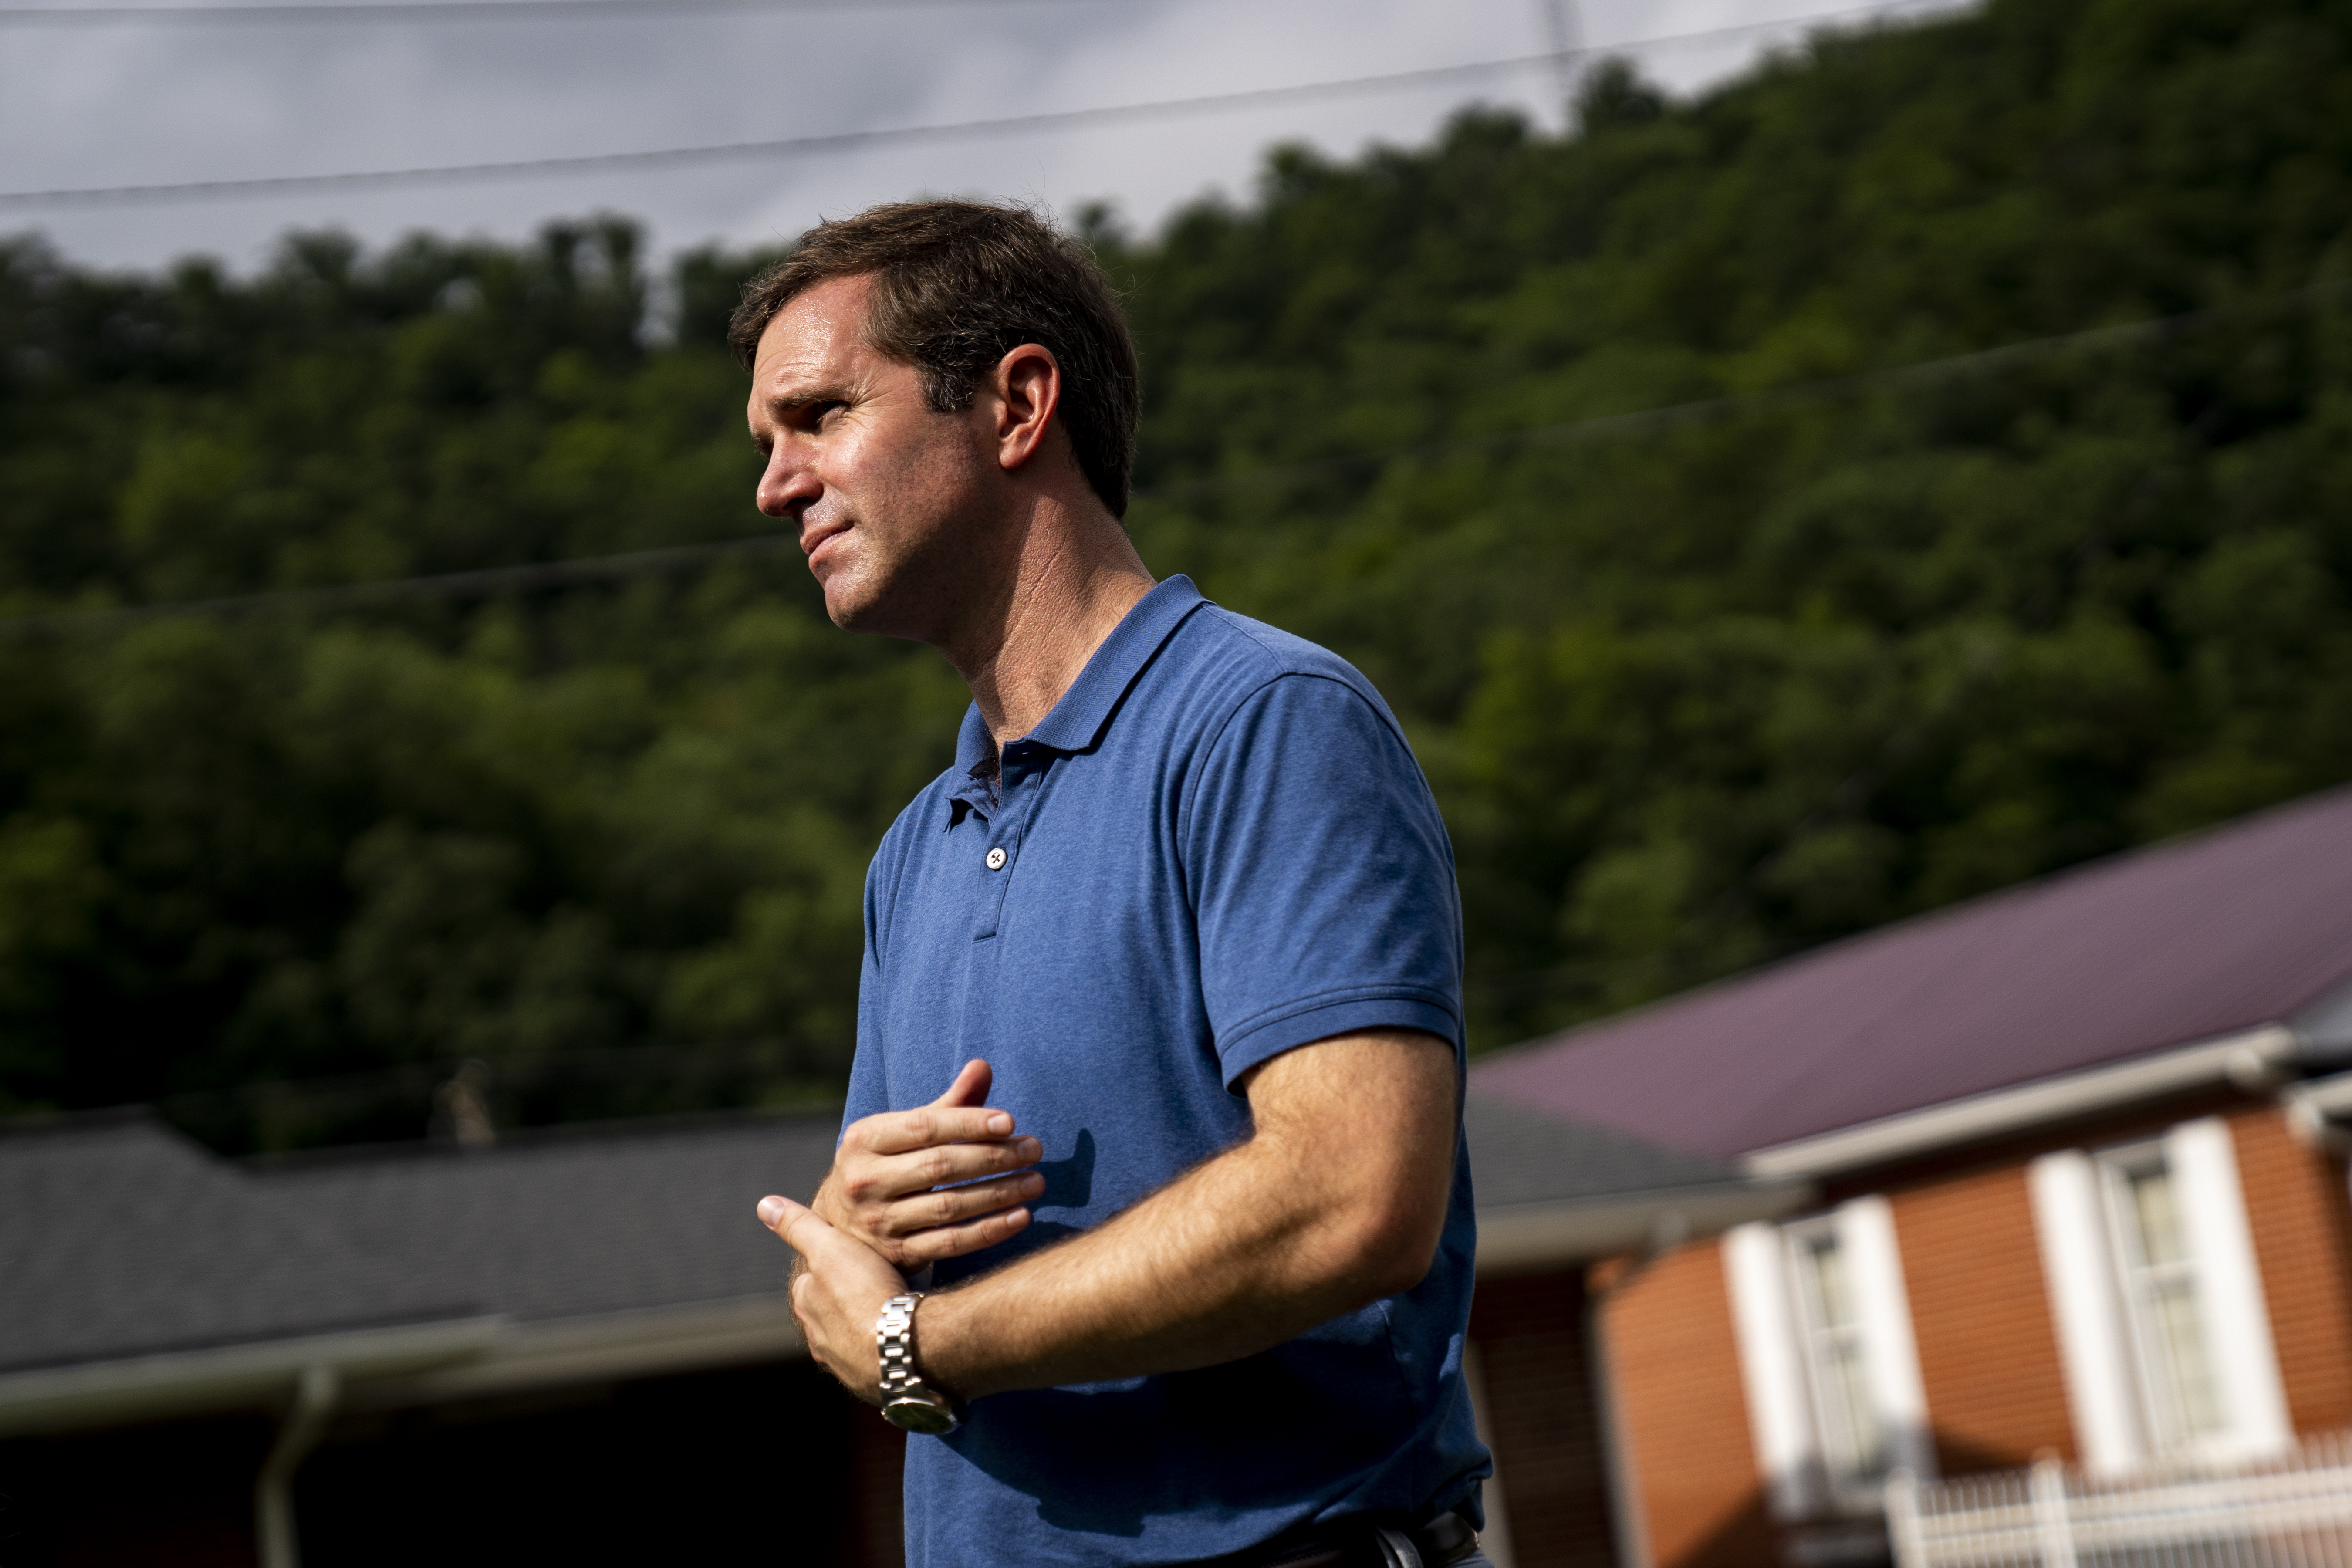 Kentucky’s Democratic governor would rather not talk about climate change